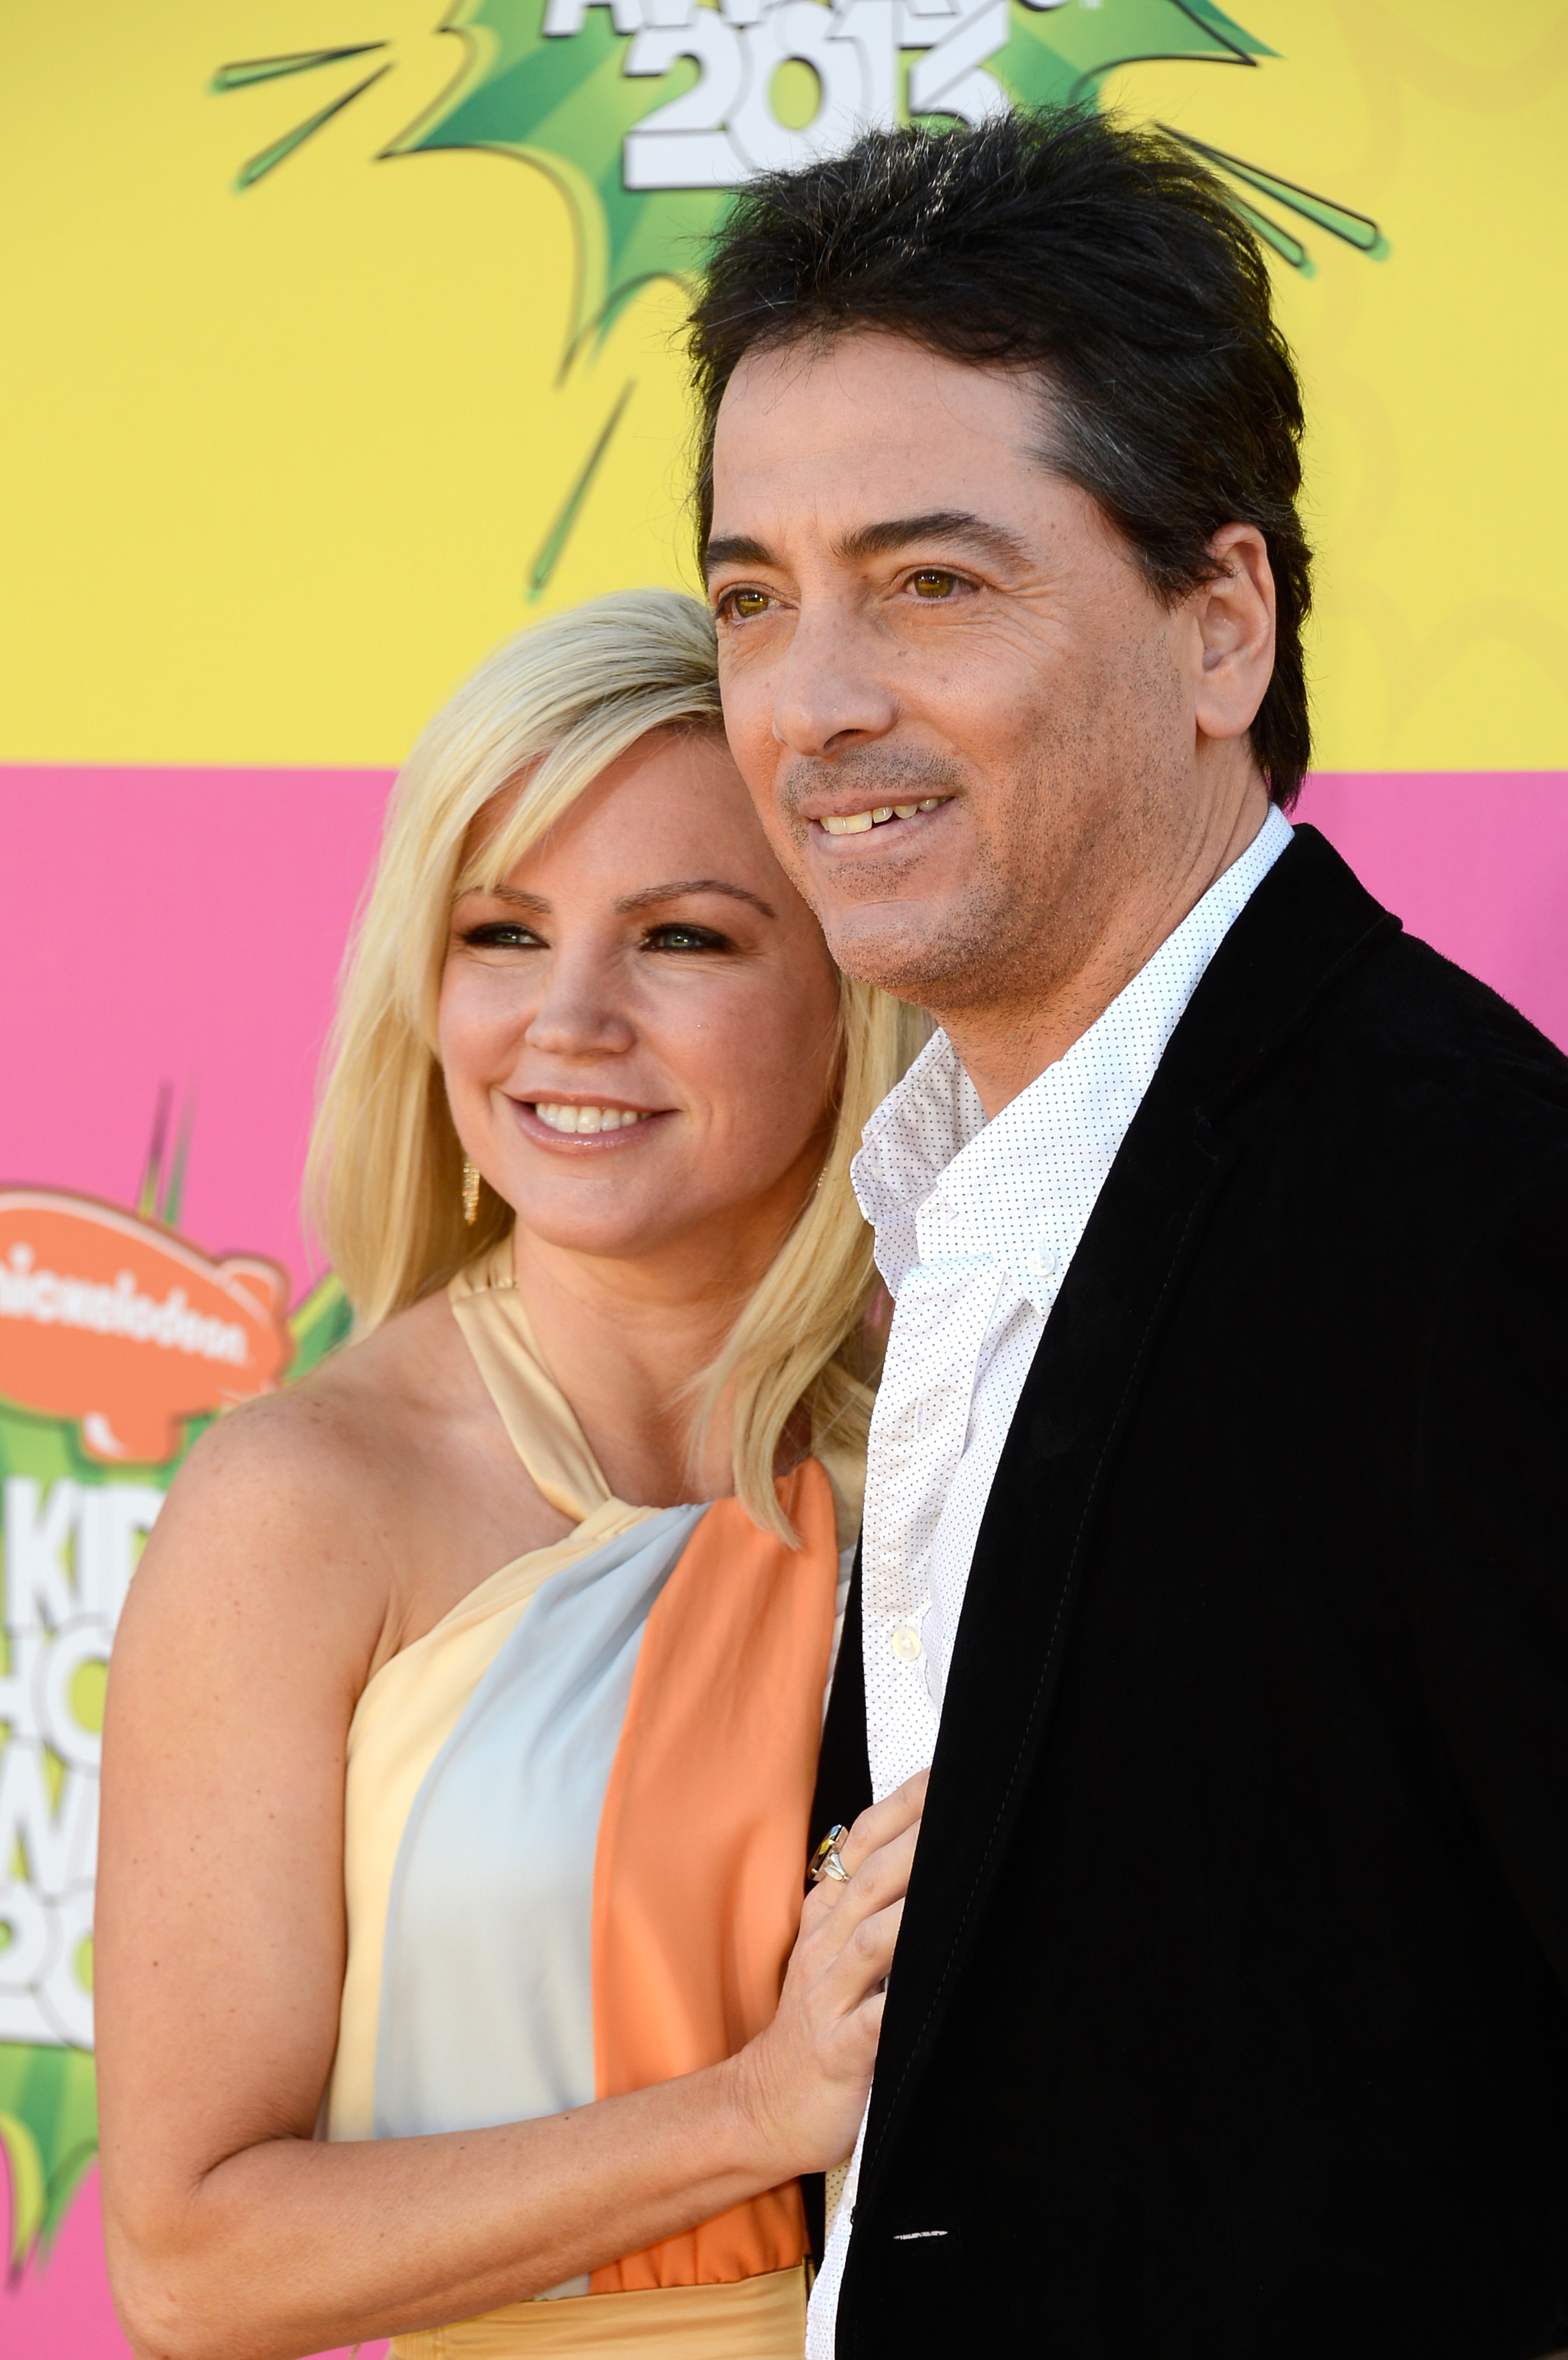 Actor Scott Bail and Renee Sloan arrives at Nickelodeon's 26th Annual Kids' Choice Awards at USC Galen Center on March 23, 2013 in Los Angeles, California. | Source: Getty Images